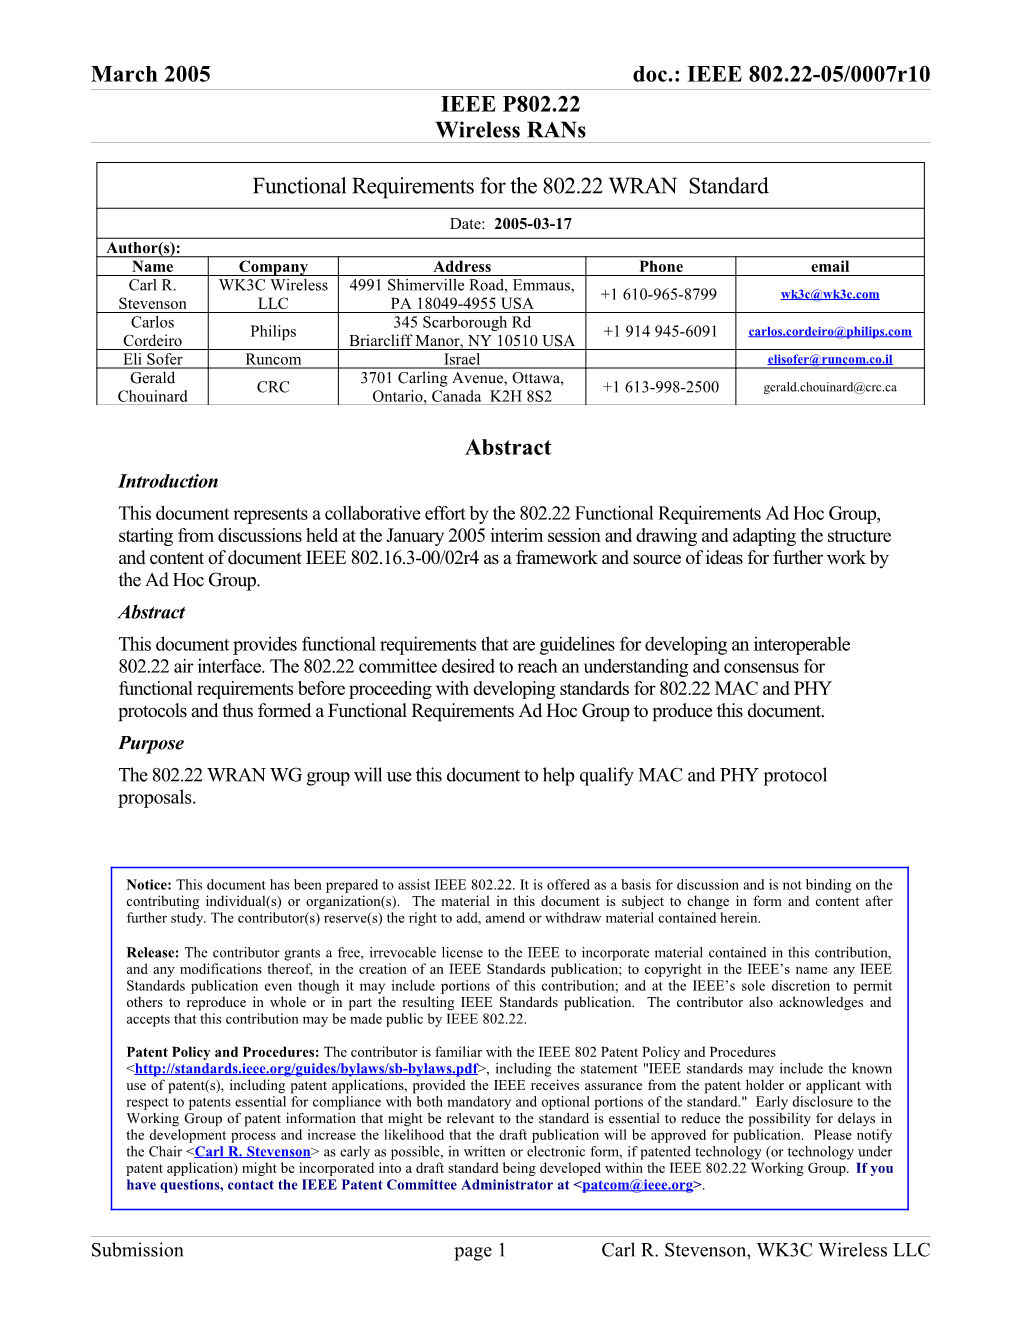 March 2005 Doc.: IEEE 802.22-05/0007R10 Doc.: IEEE 802.22-05/0007R8